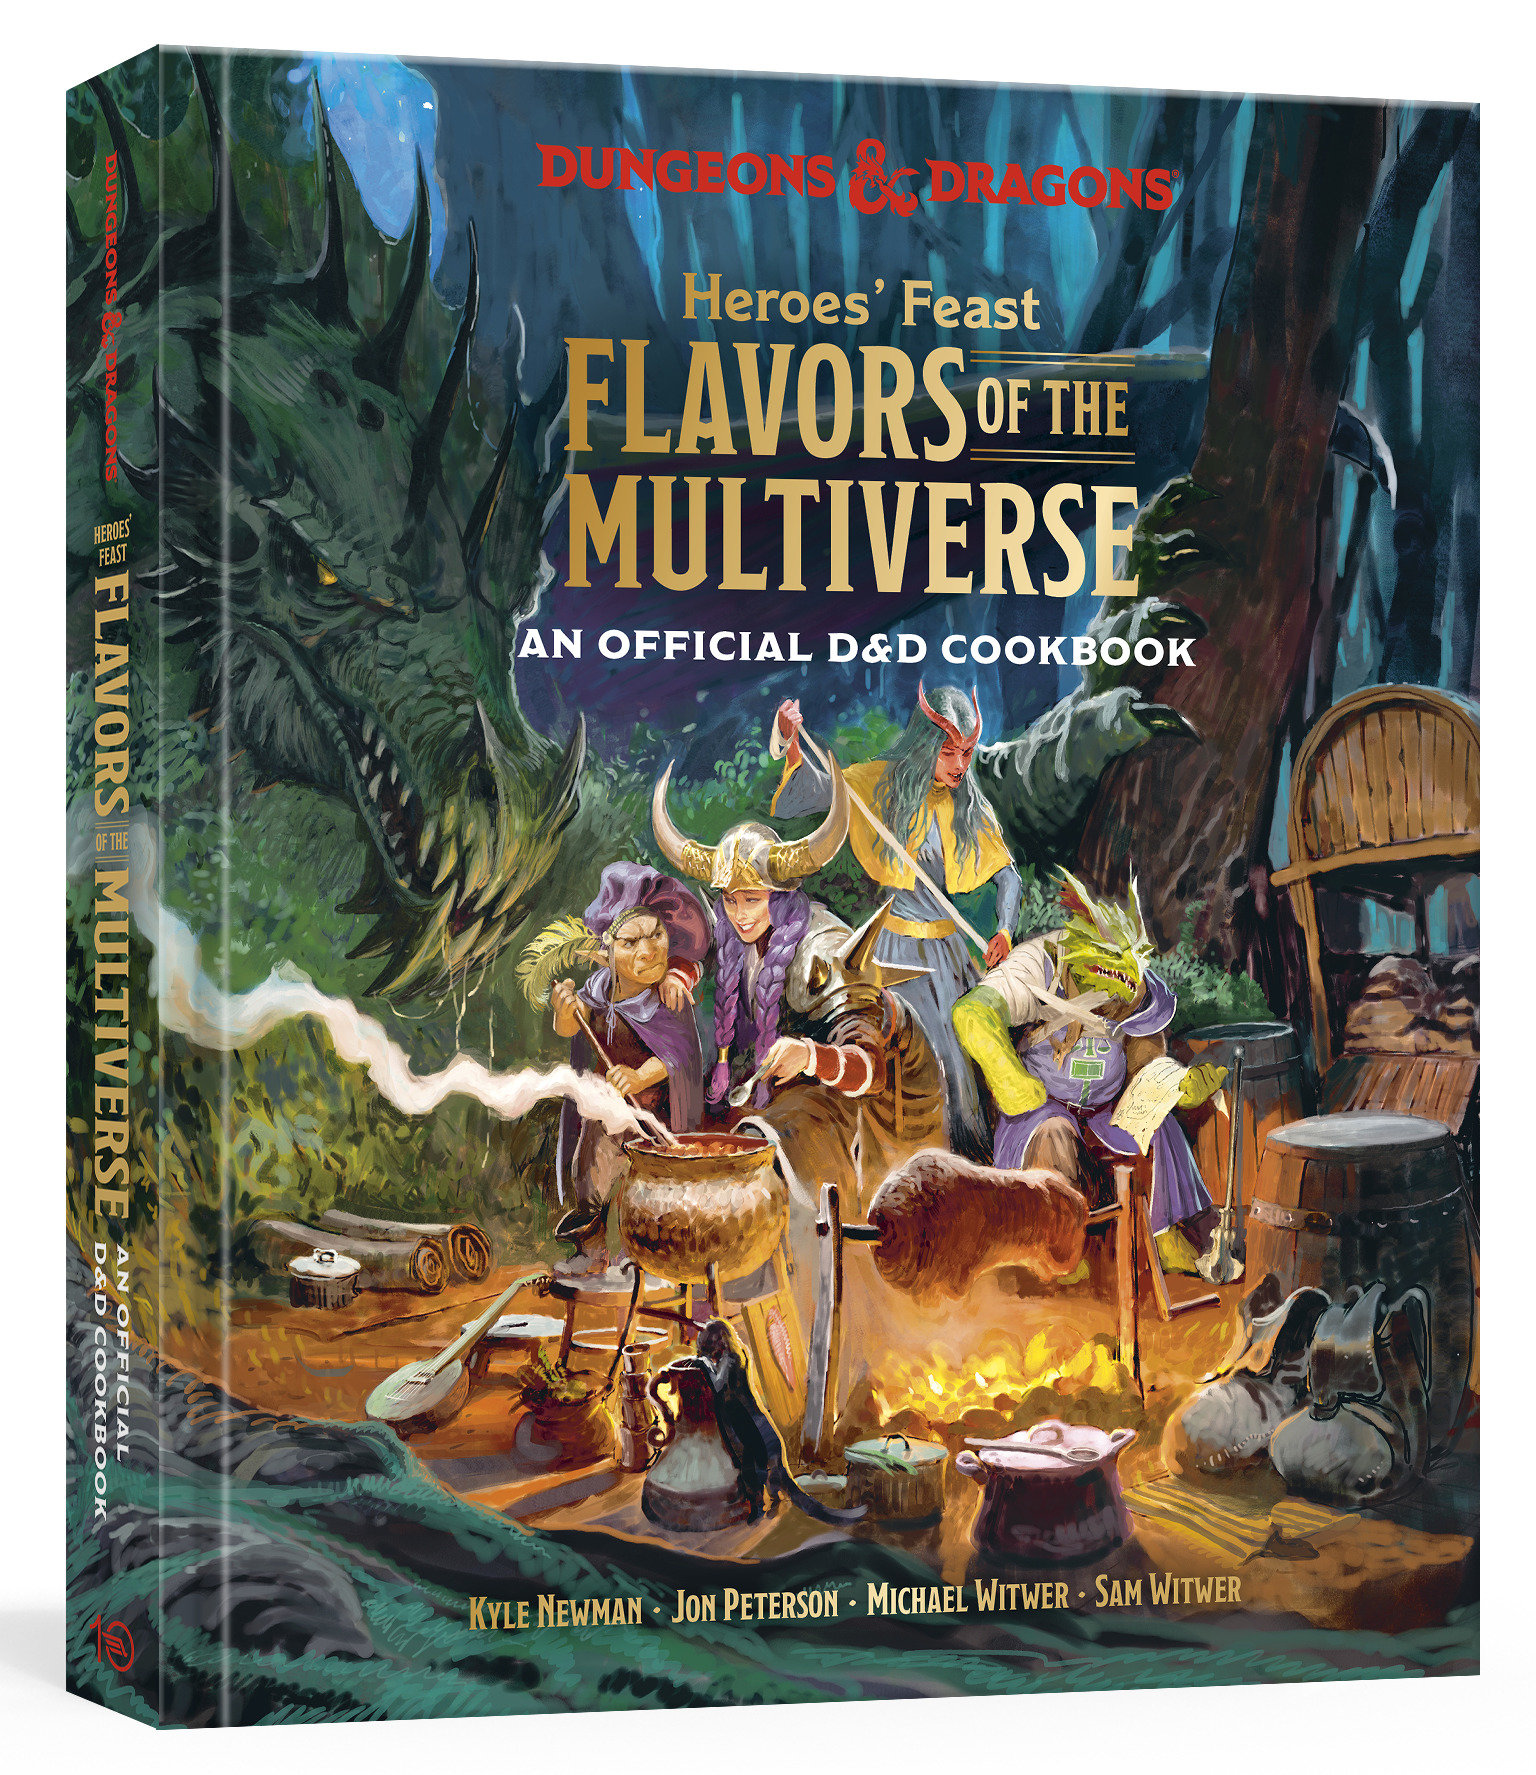 Dungeons & Dragons
Heroes' Feast Flavors of The Multiverse